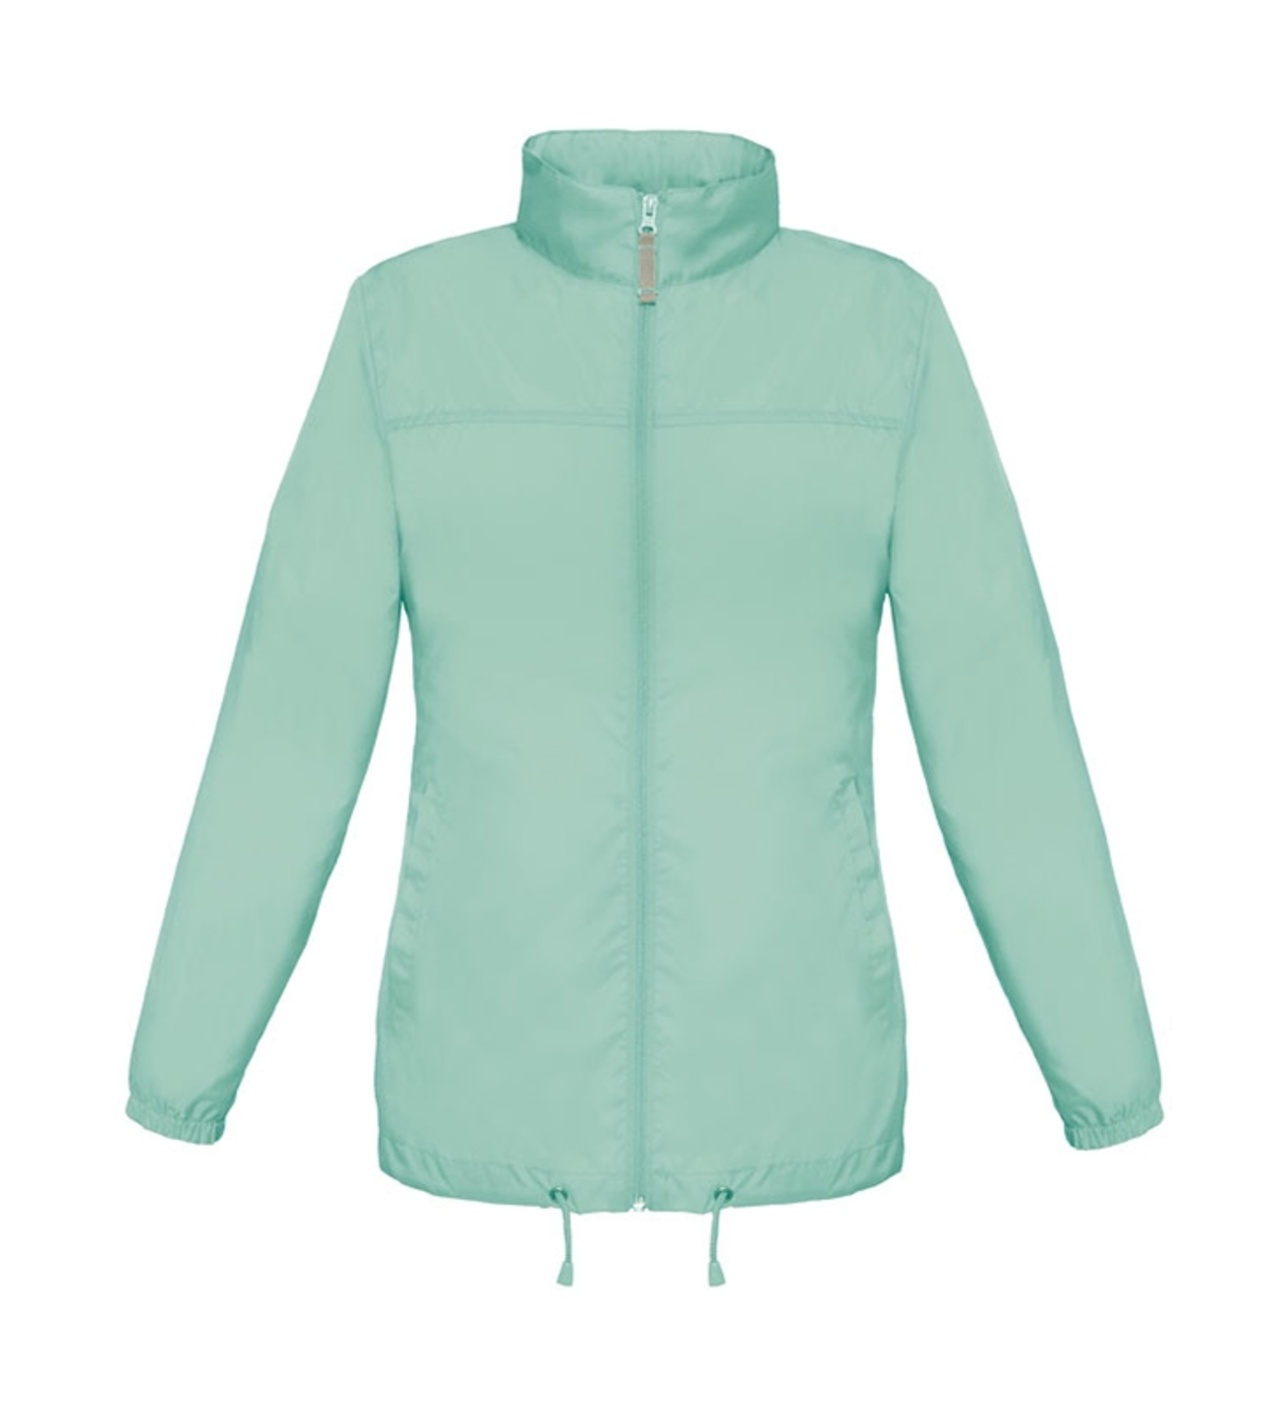 B and C Collection Sirocco Woman - PIXEL TURQUOISE - XL